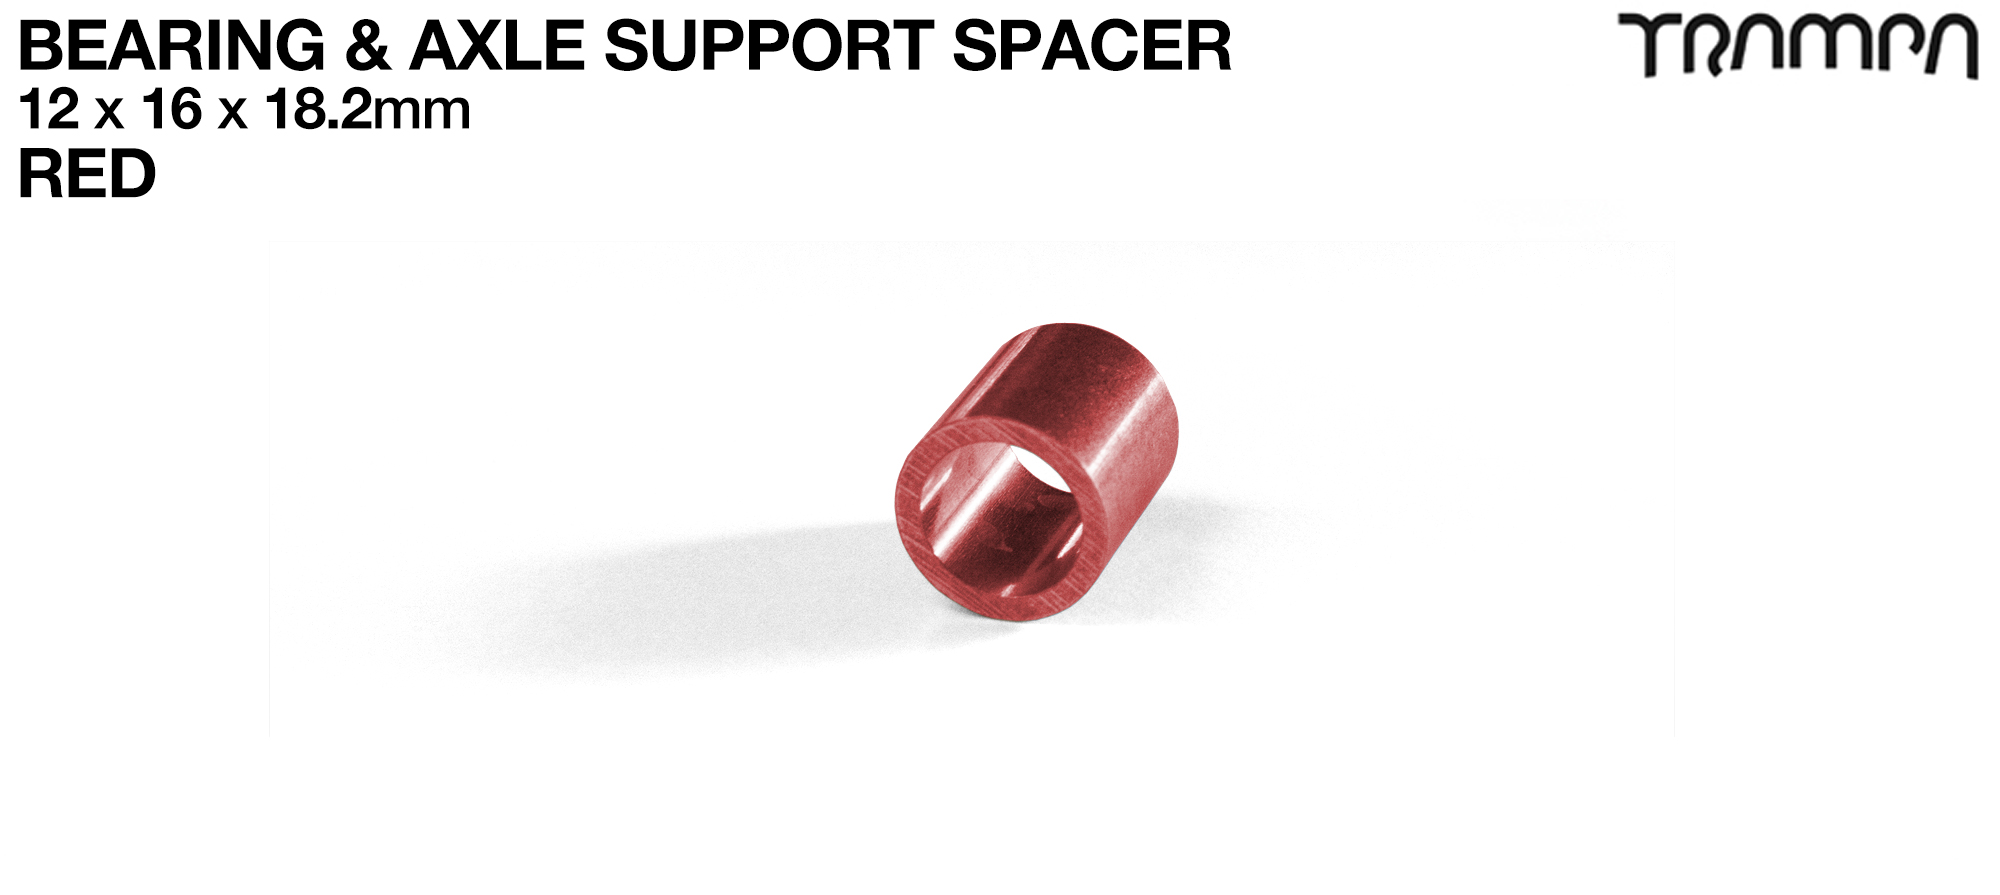 18.2mm Wheel Support Axle Spacers - RED x4